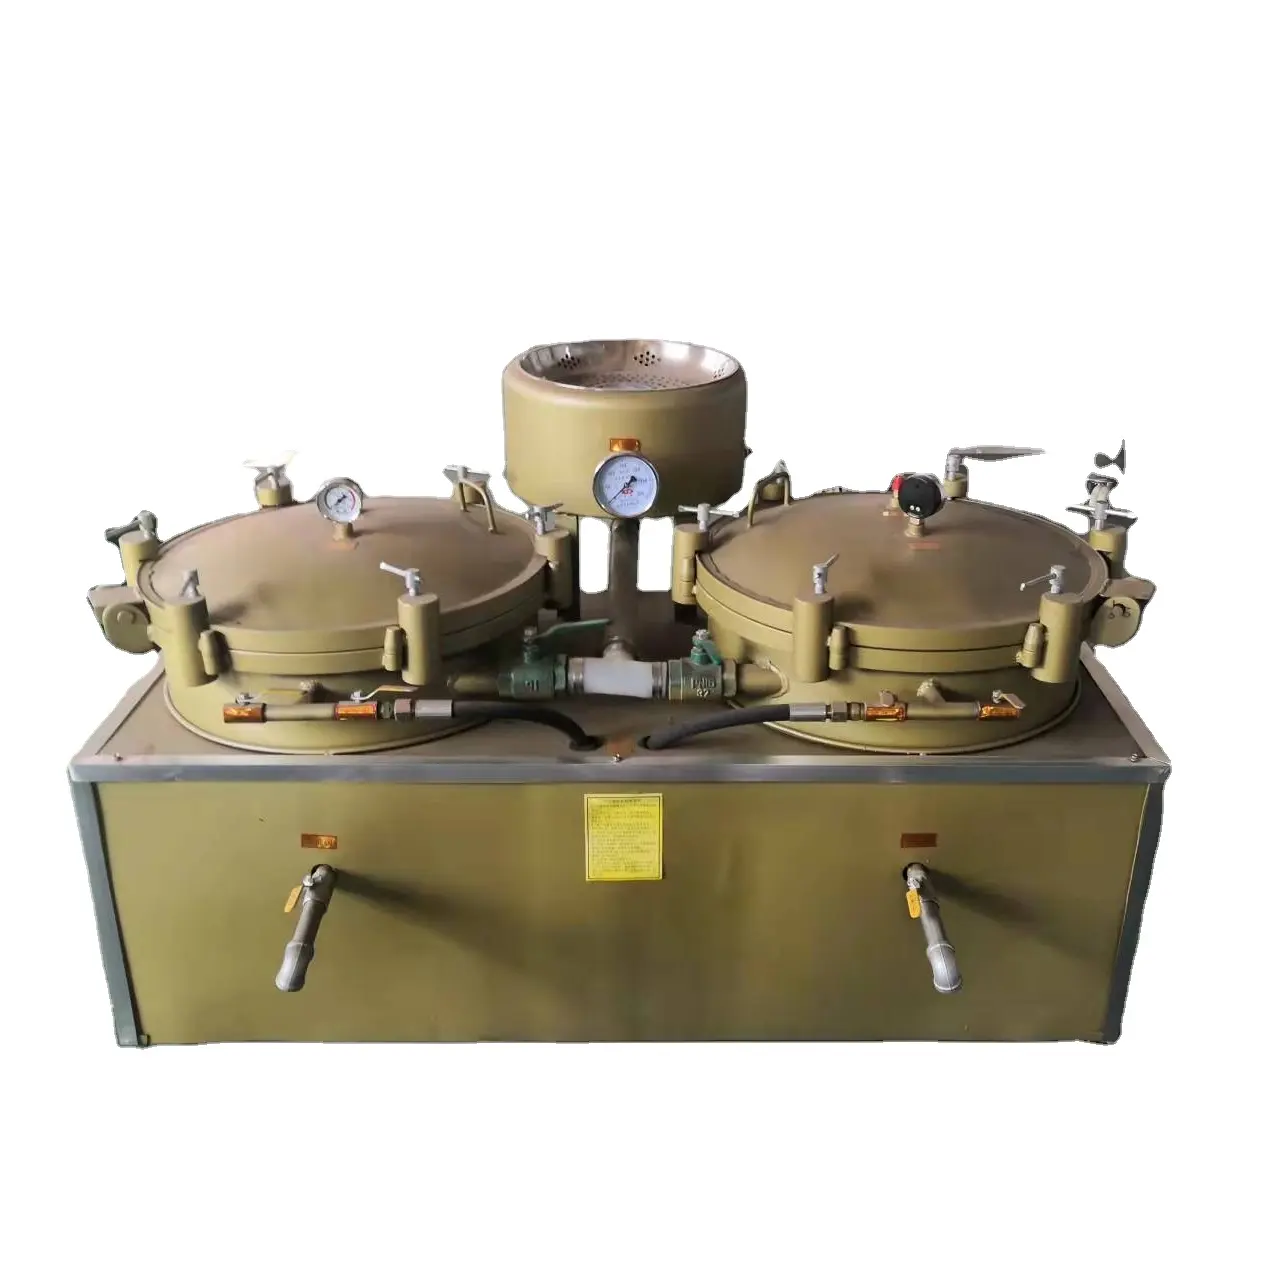 Cooking oil purifier oil filtering machine / Vacuum pressure oil filter machine for removing the water